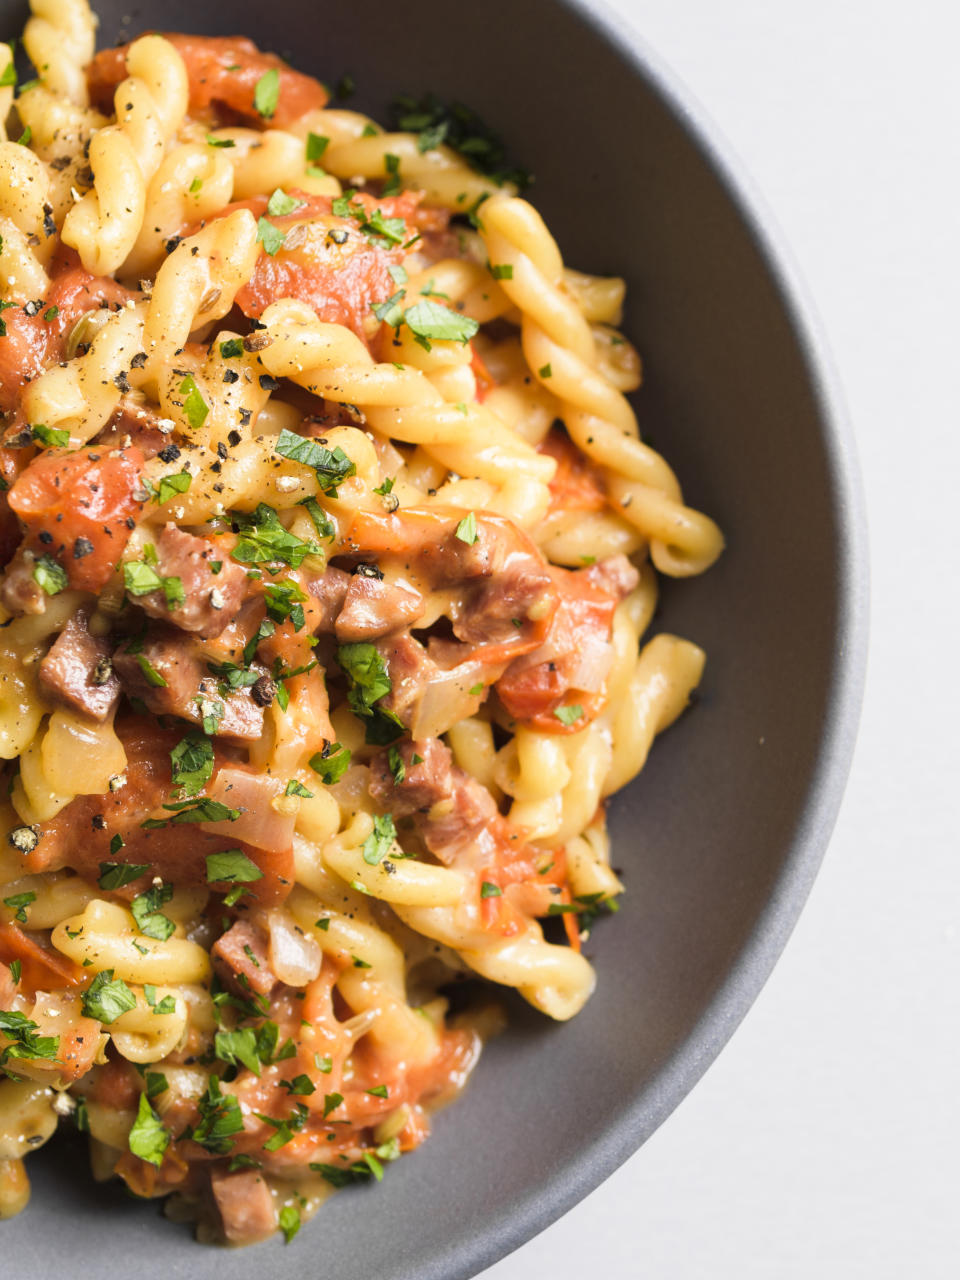 This image released by Milk Street shows a recipe for Gemelli w/Tomatoes, Salami and Fontina. (Milk Street via AP)